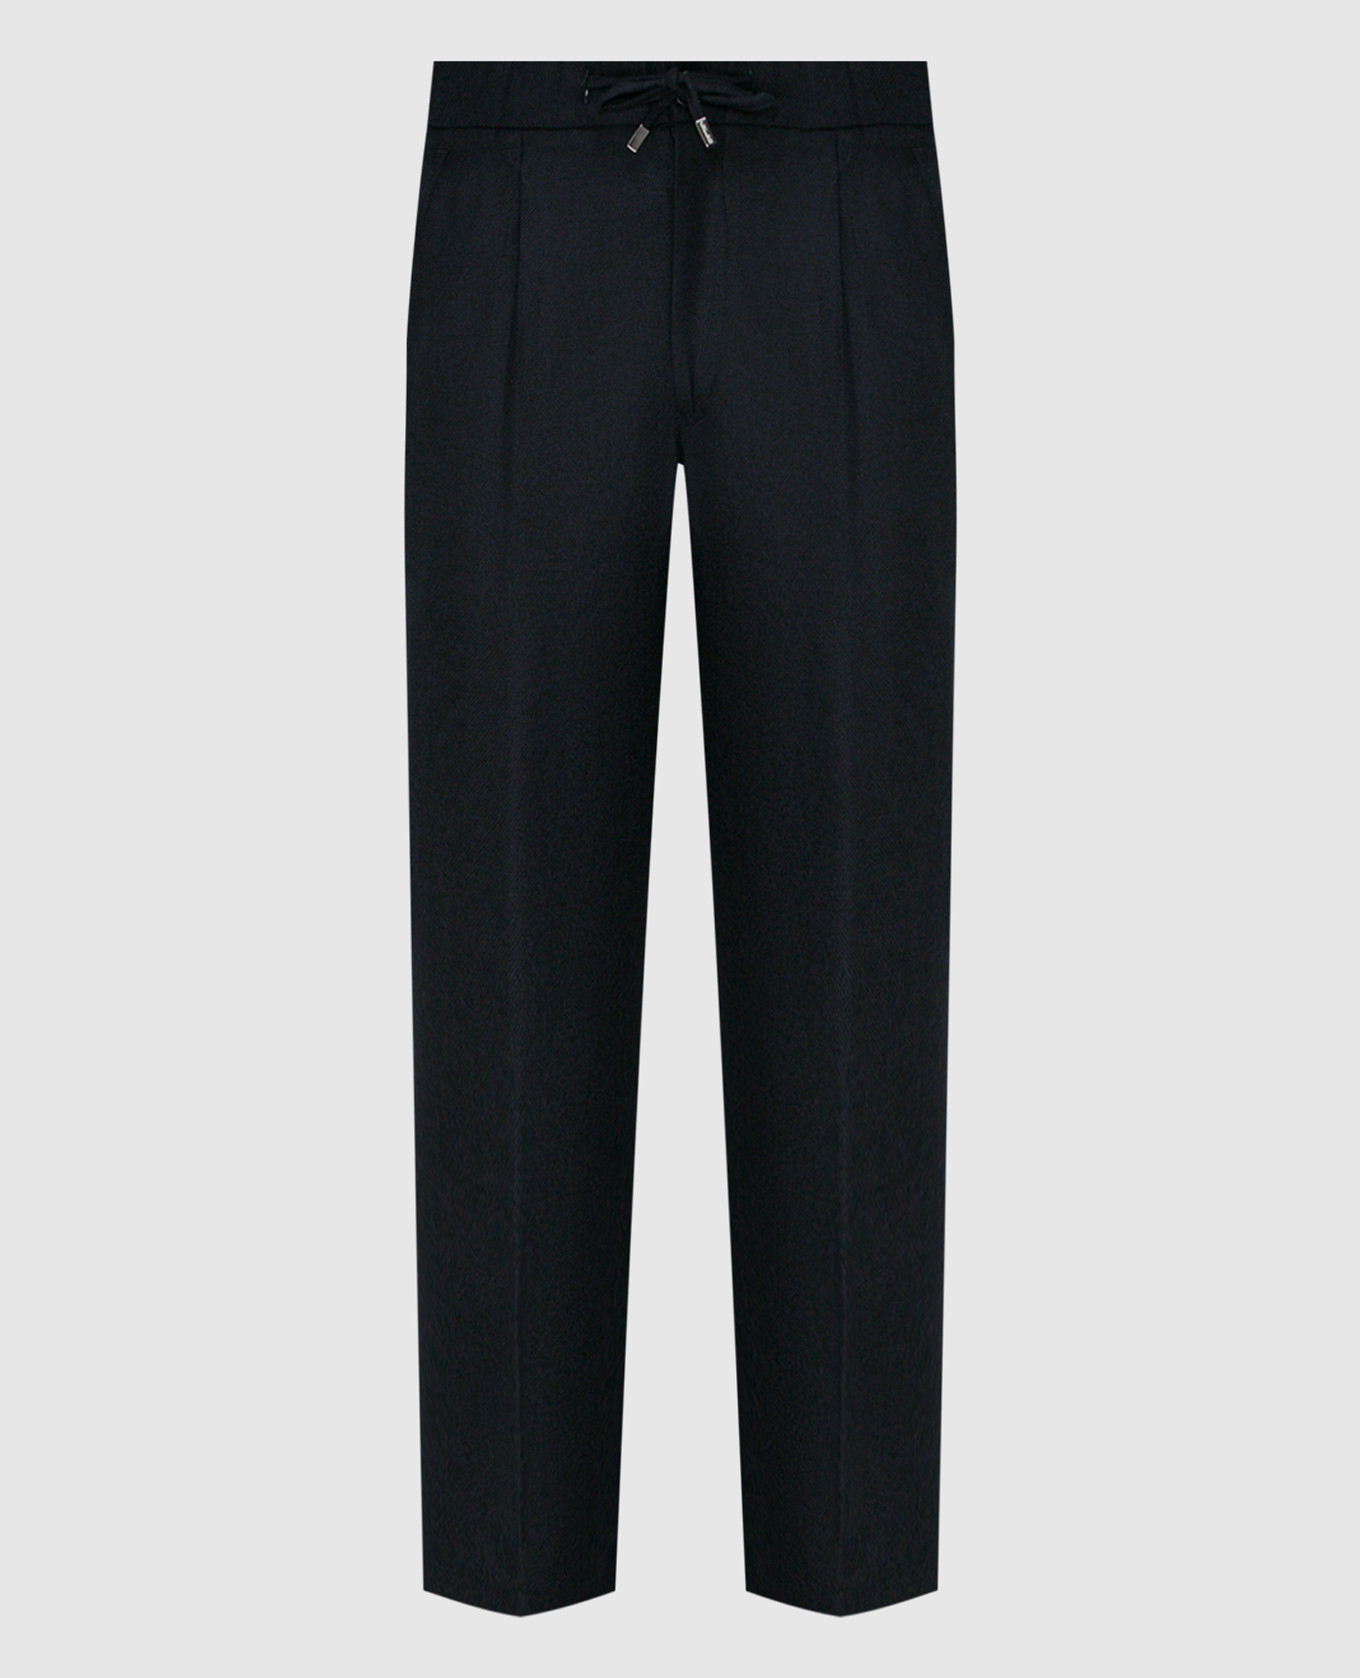 Blue wool and cashmere trousers